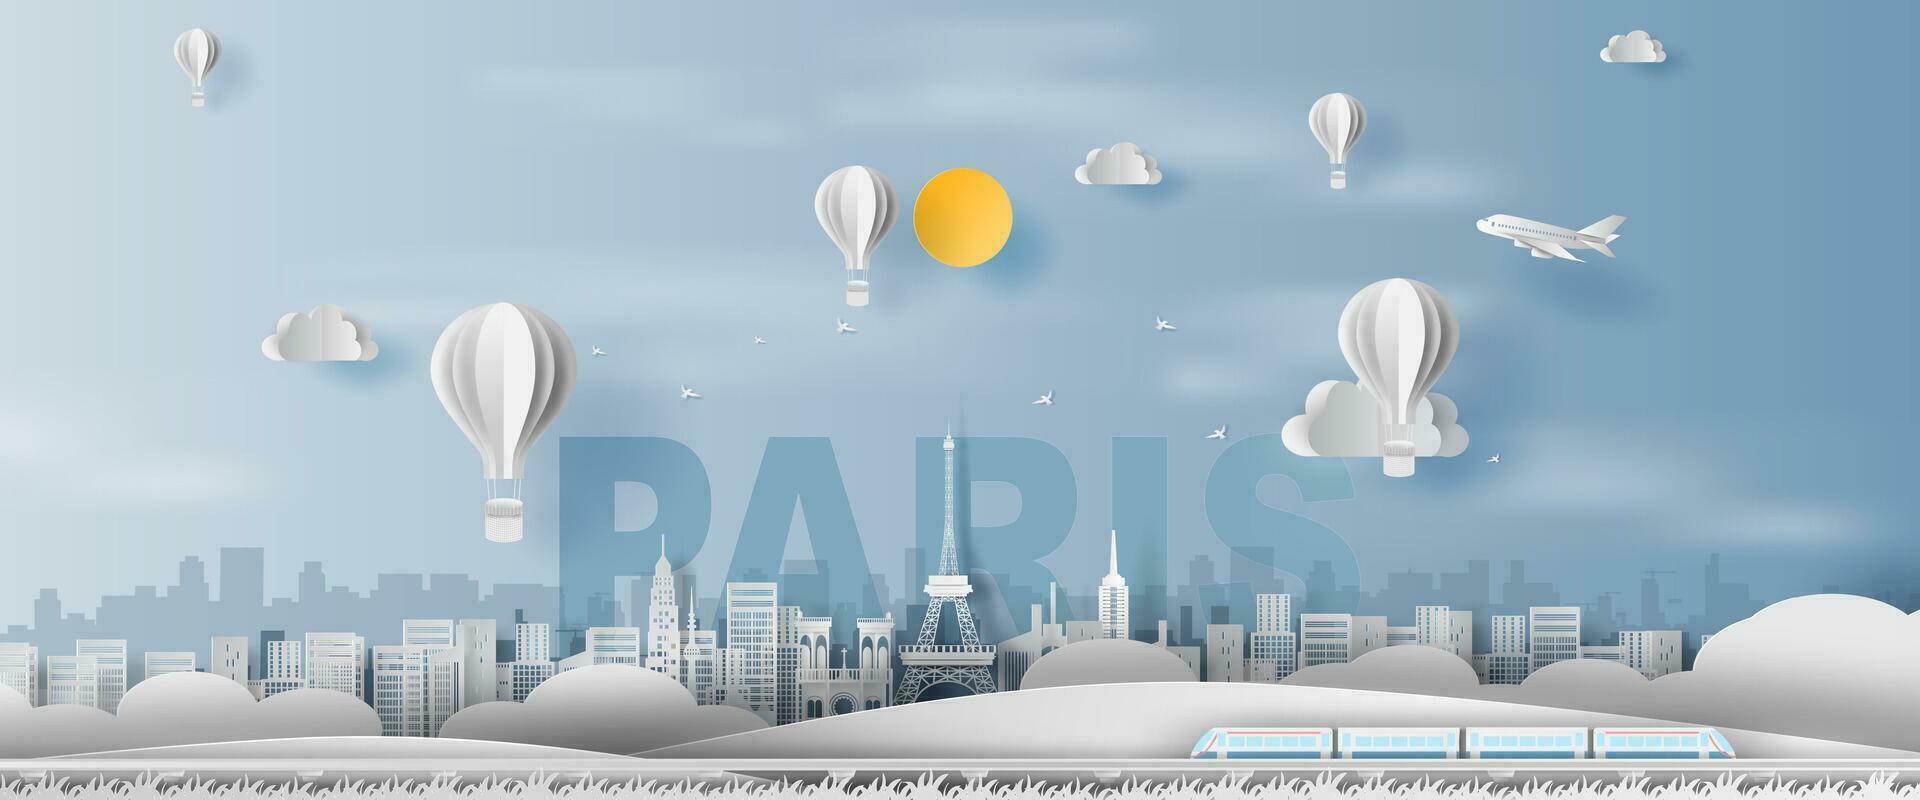 Paper craft and cut of Traveling holiday Eiffel tower Paris city France,Travel holiday time transportation train landmarks landscape concept,Creative paper art white balloon.illustration.vector. vector